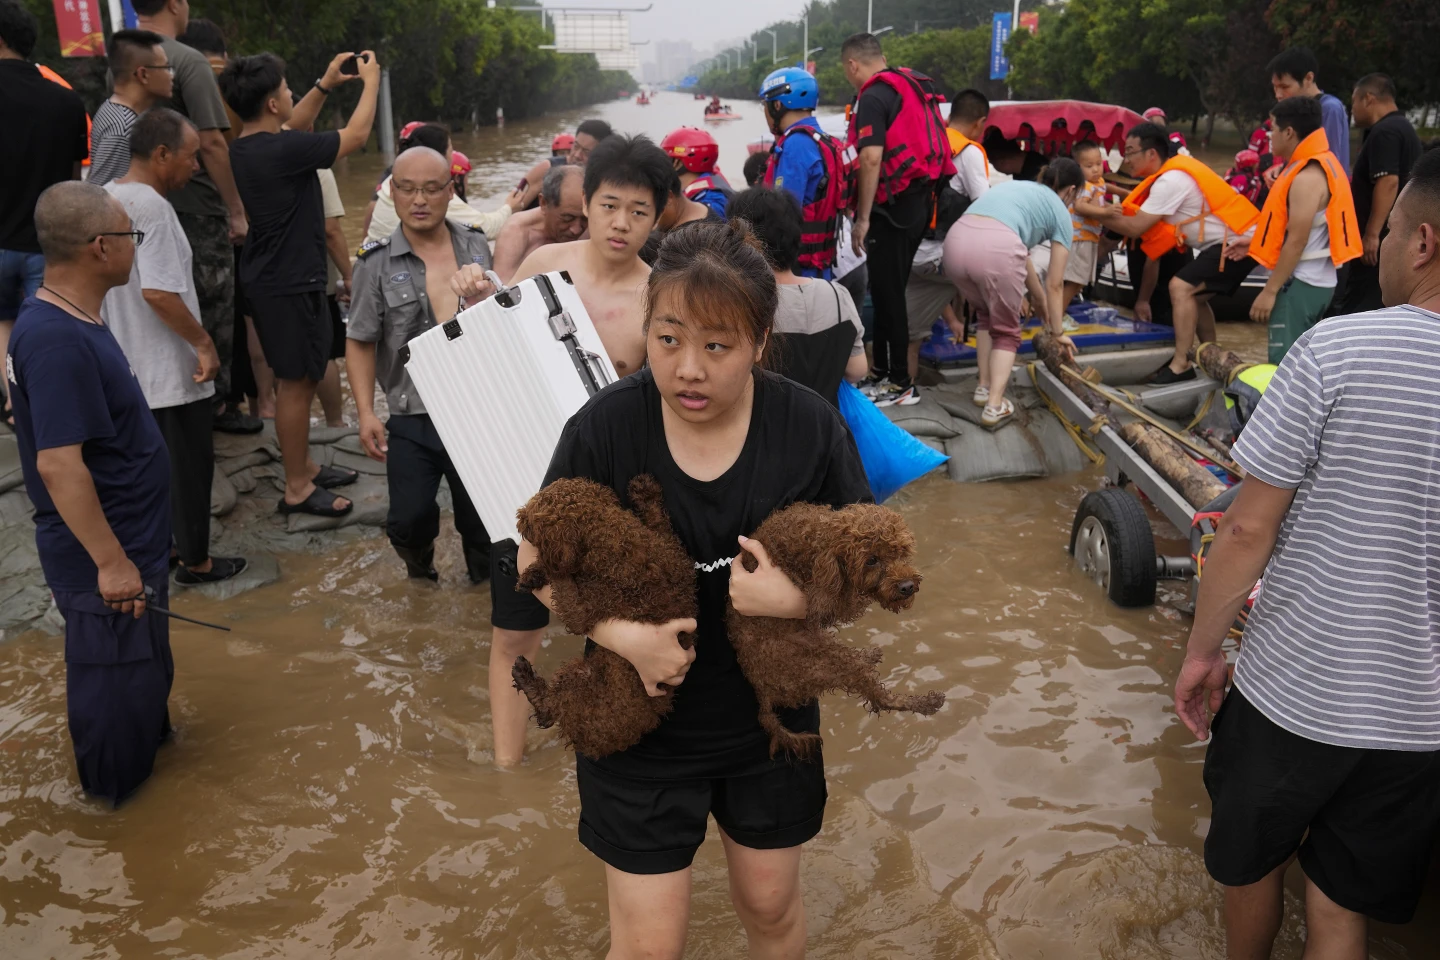 A woman carries her pet dogs as residents are evacuated on rubber boats through floodwaters in Zhuozhou in northern China’s Hebei province, south of Beijing, Wednesday, 2 August 2023. Severe floods in China’s northern province of Hebei brought by remnants of Typhoon Doksuri this month killed at least 29 people and caused billions of dollars in economic losses, its provincial government said Friday, 11 August 2023. Photo: Andy Wong / AP Photo